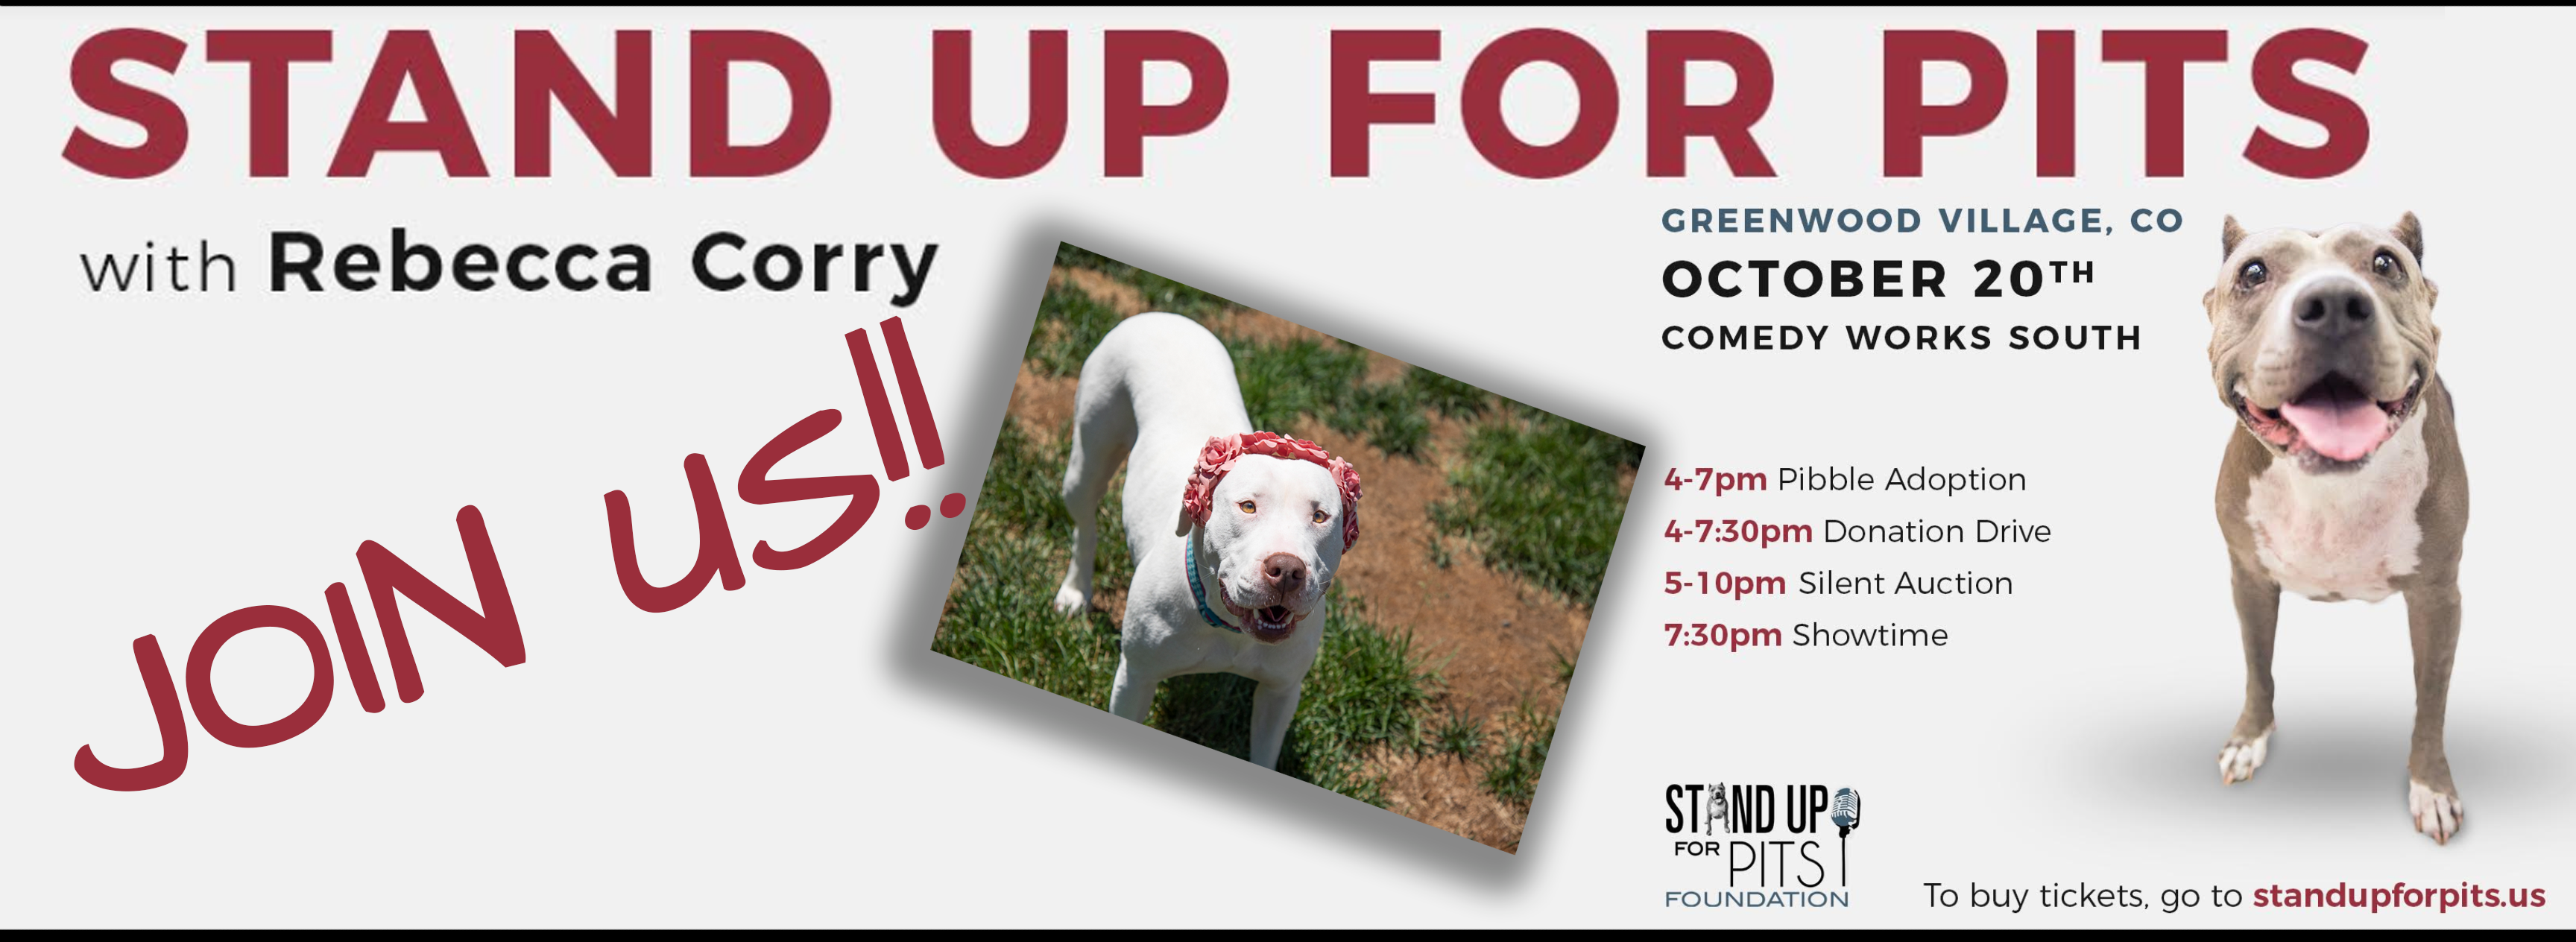 EVENT: Stand Up For Pits! October 20, 2019